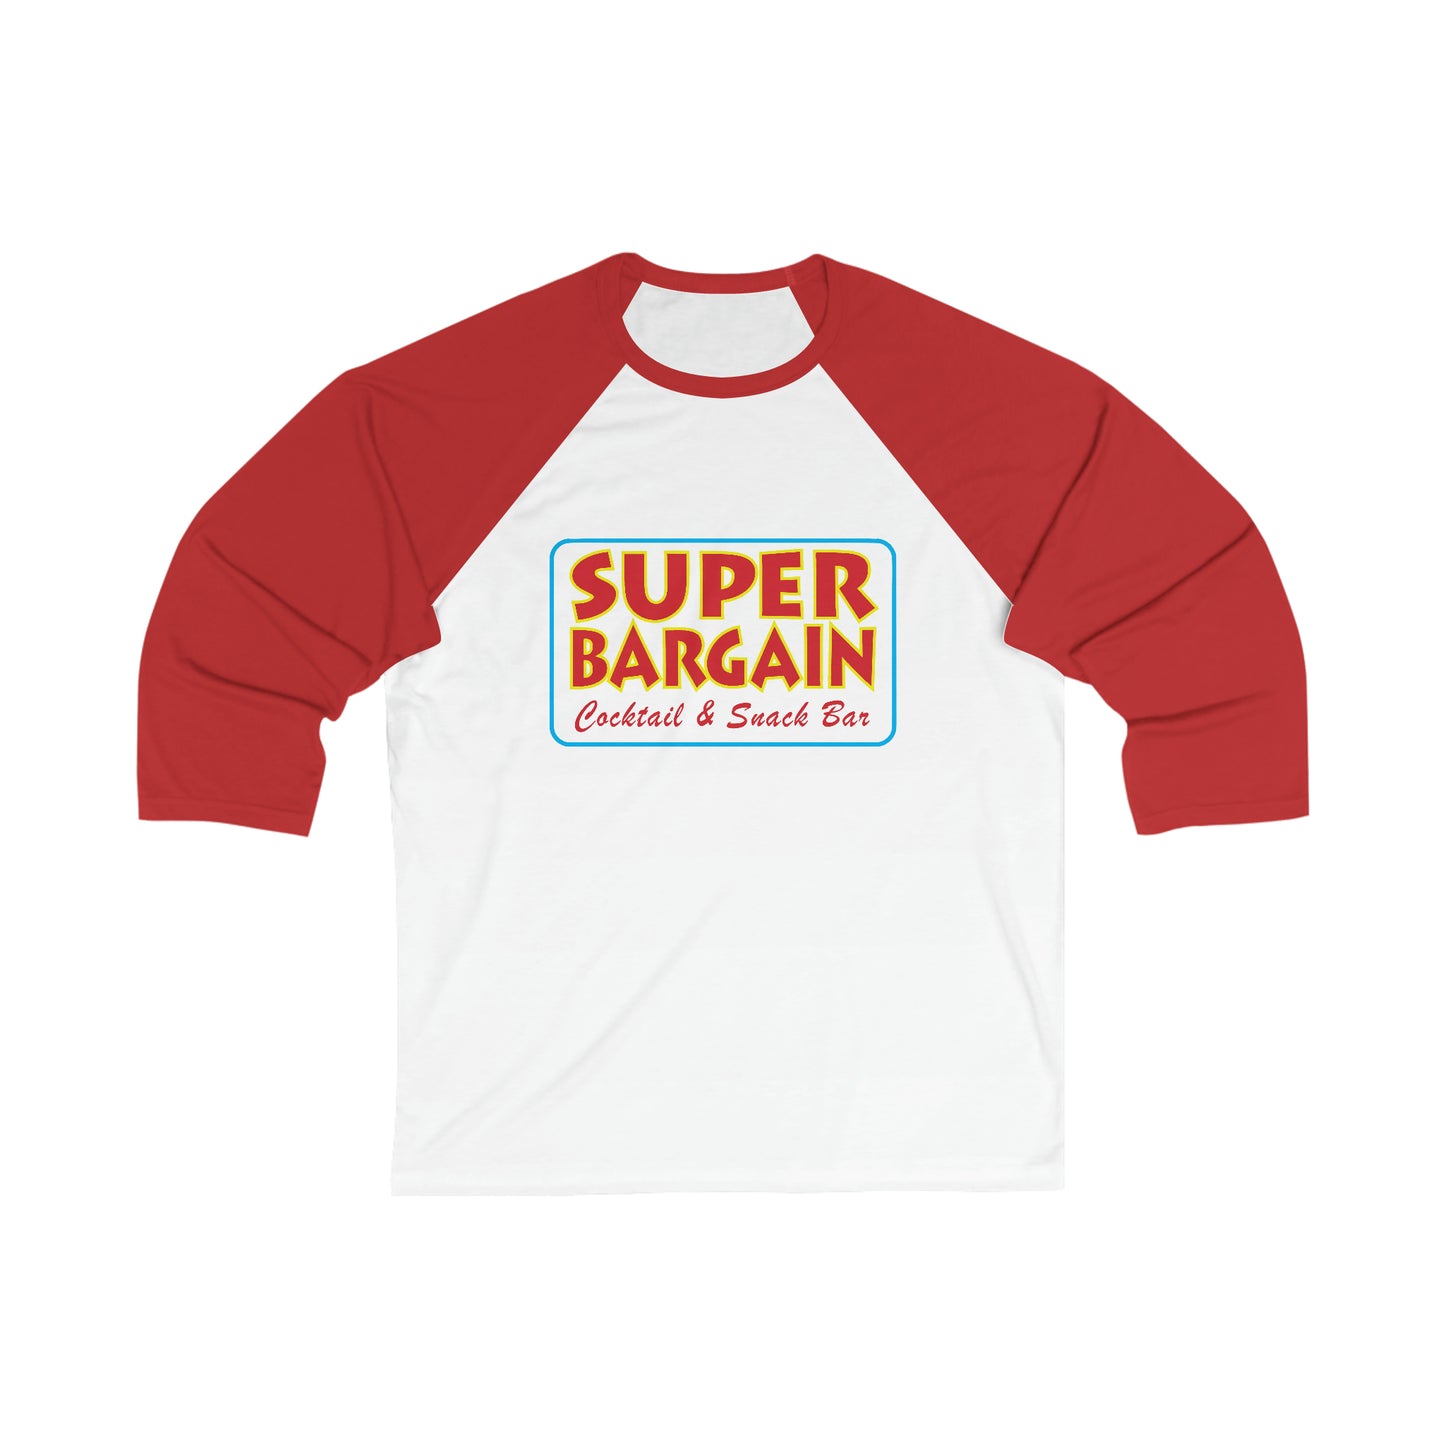 A Printify Unisex 3/4 Sleeve Logo Baseball Tee with red sleeves and a white torso featuring a colorful text design that reads "SUPER BARGAIN, Cabbagetown Cocktail & Snack Bar" in yellow, green, and red.